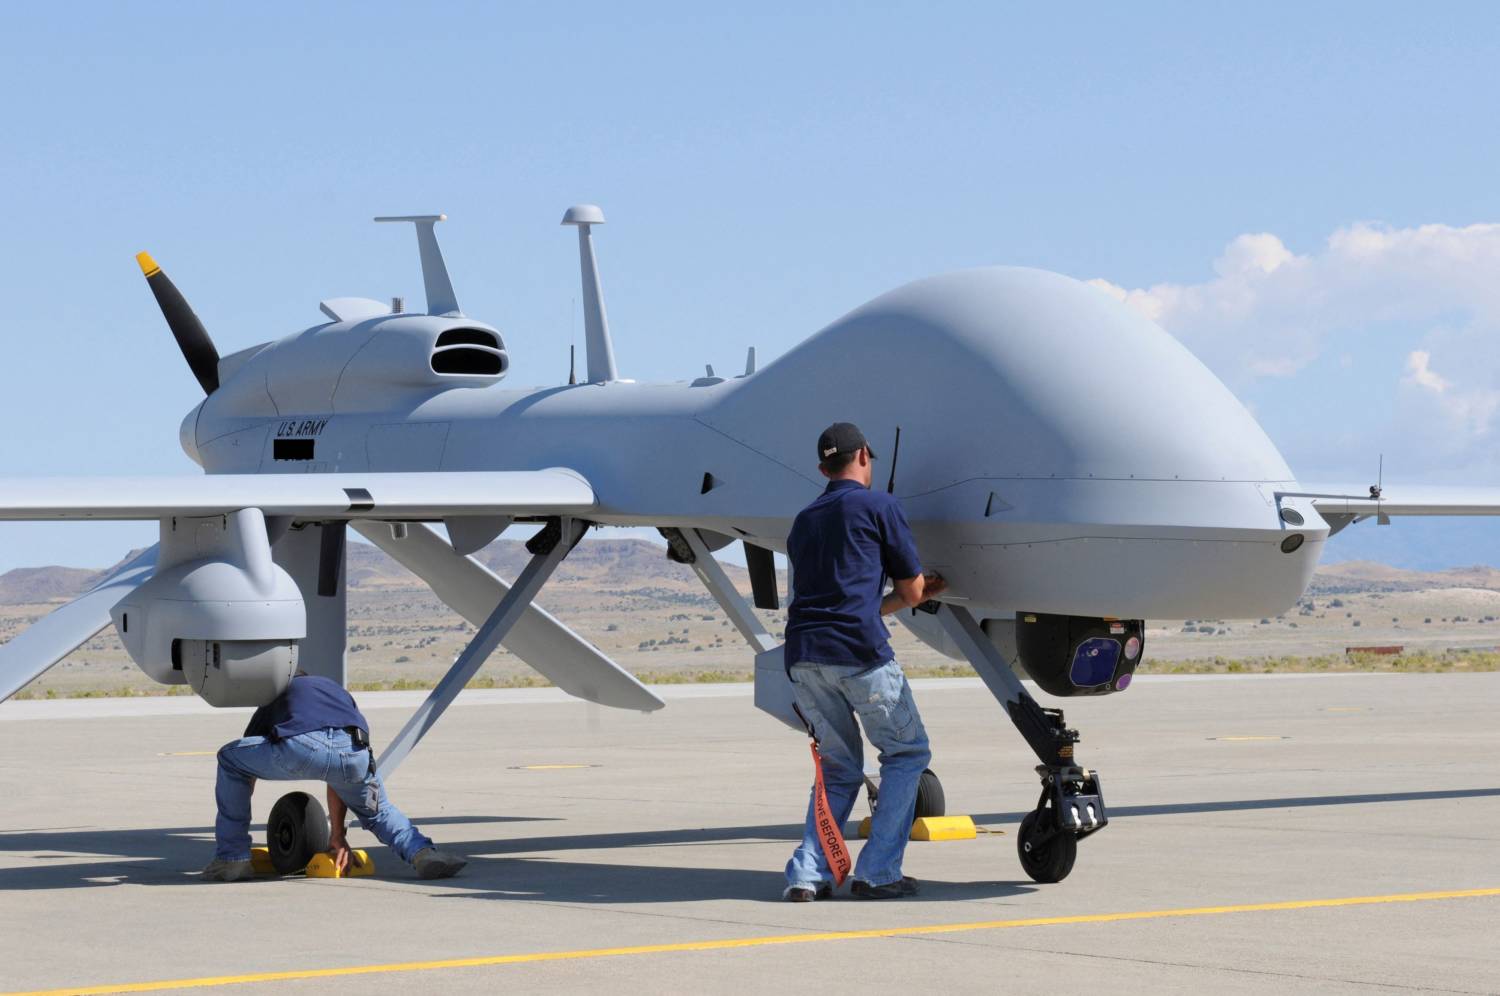 File Photo: Workers Prepare An Mq 1c Gray Eagle Unmanned Aerial Vehicle For Static Display At Michael Army Airfield, Dugway Proving Ground In Utah In This Us Army Handout Photo